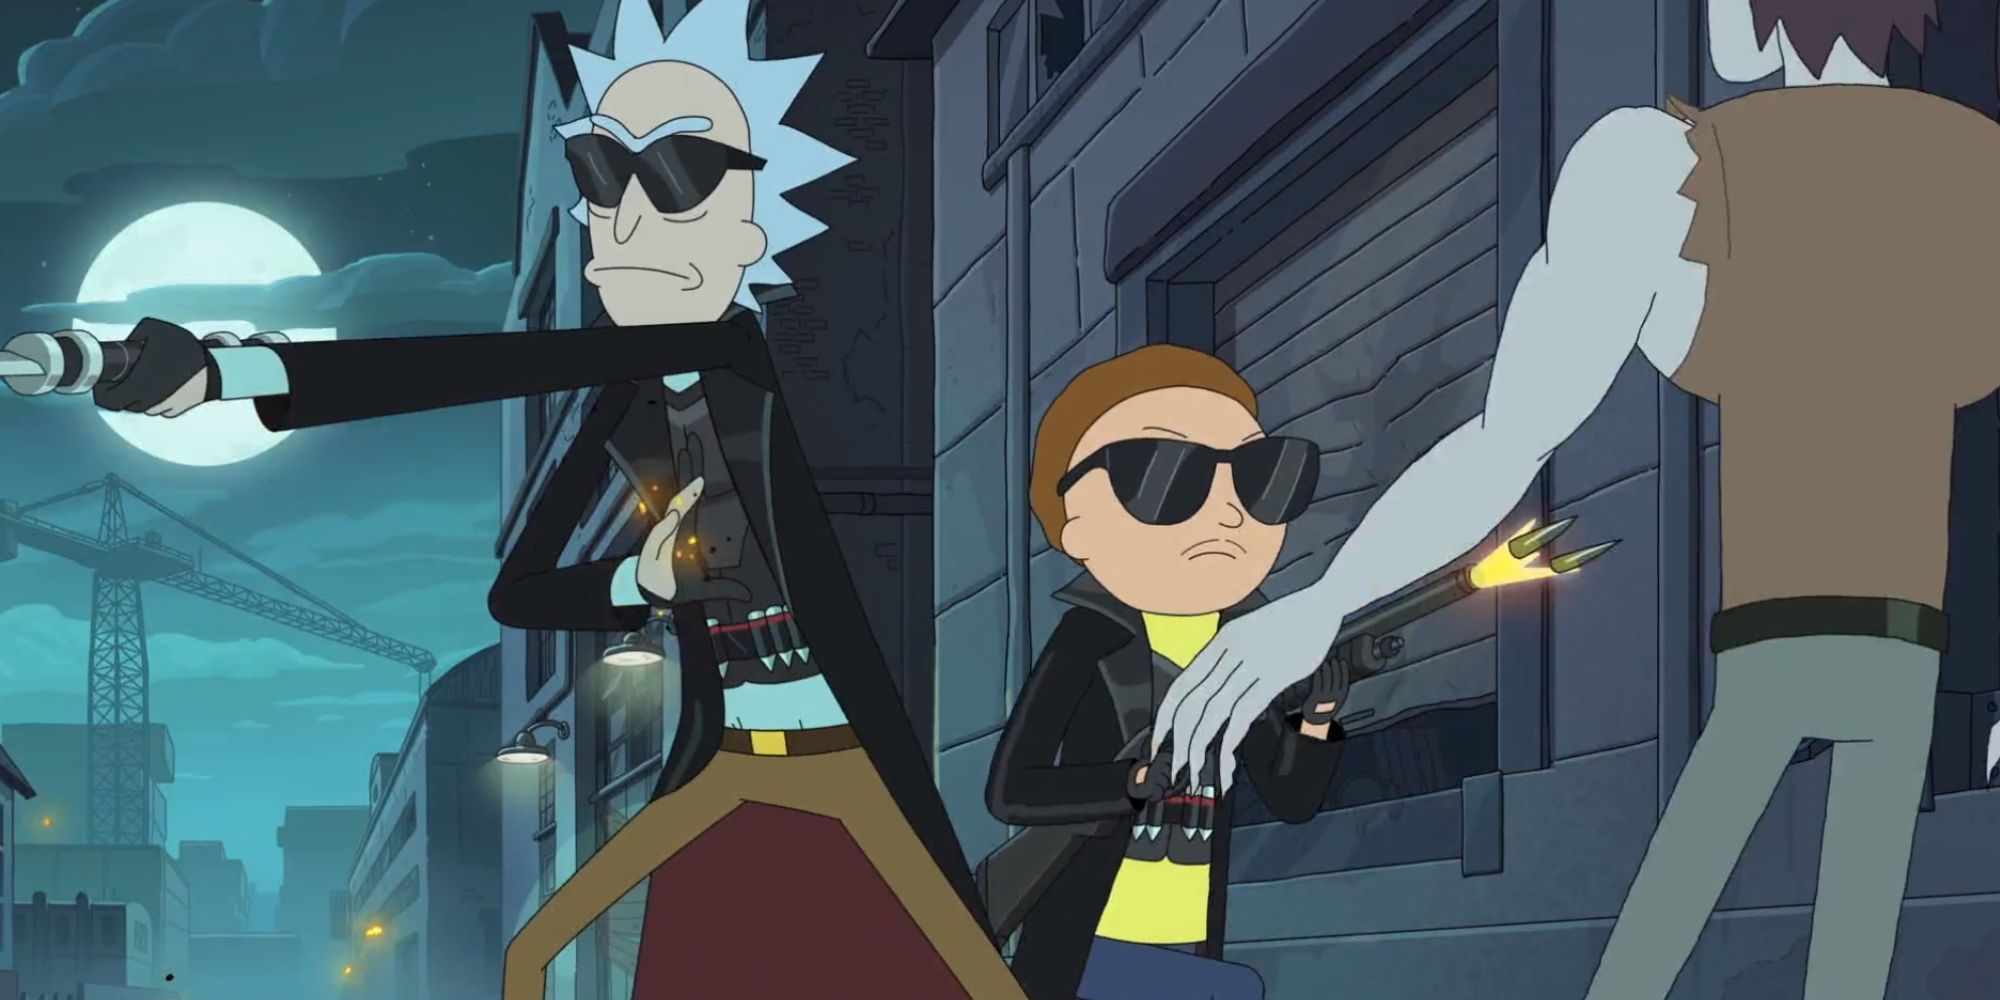 Cartoon characters Rick and Morty are dressed in black leather coats and black sunglasses. Rick wields a sword and Morty has a gun. 